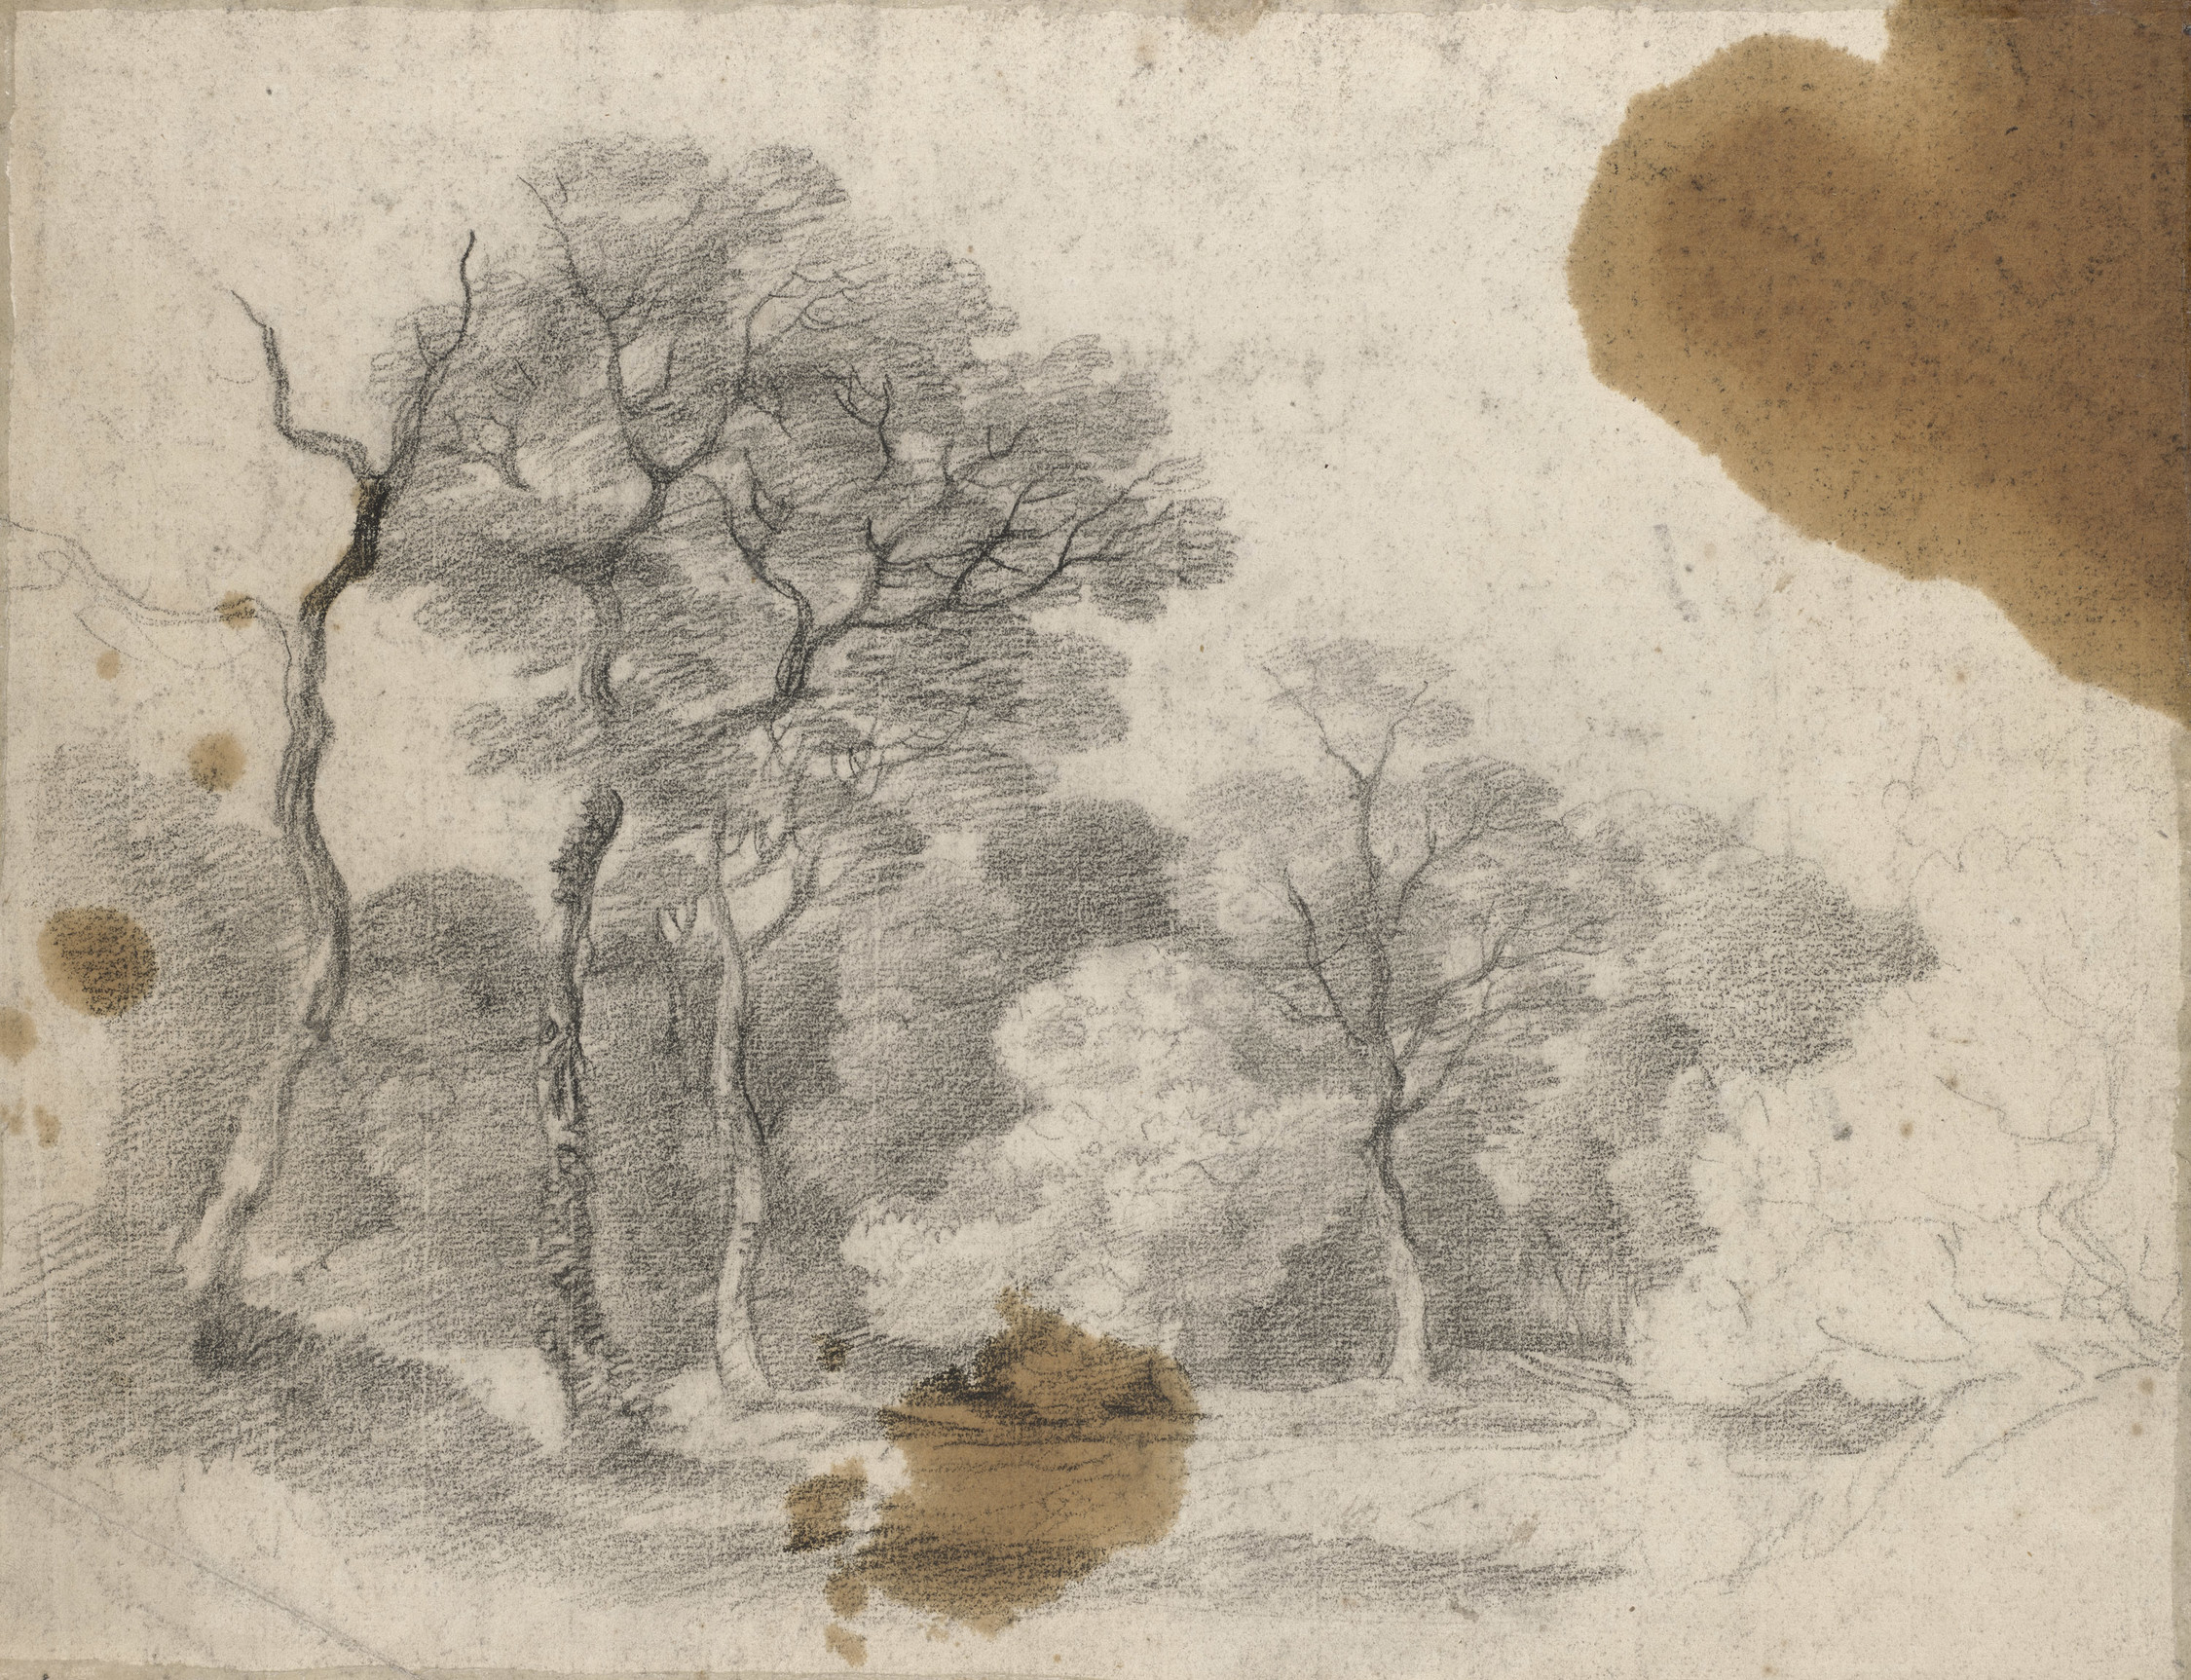 A&nbsp;drawing in black chalk and stump&nbsp;of trees and a path, with cows and two figures resting. Oil stains at top and lower right. On the verso, another landscape study in black chalk with trees.
This drawing is one of 25 landscape drawings in the Ro